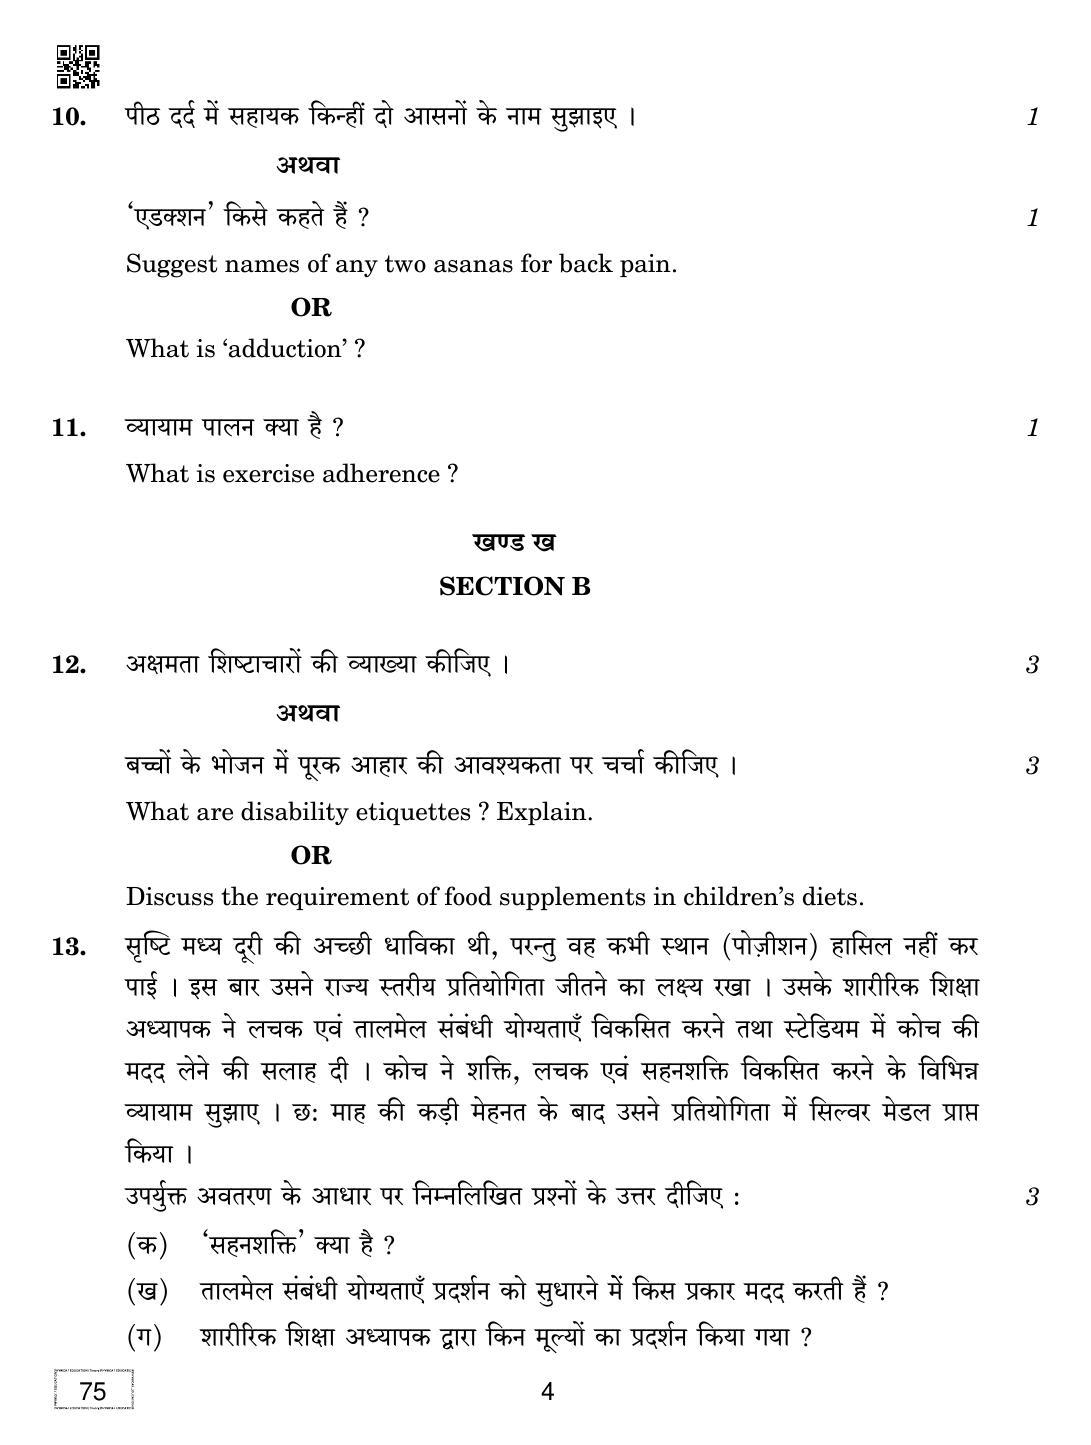 CBSE Class 12 75 PHYSICAL EDUCATION 2019 Compartment Question Paper - Page 4